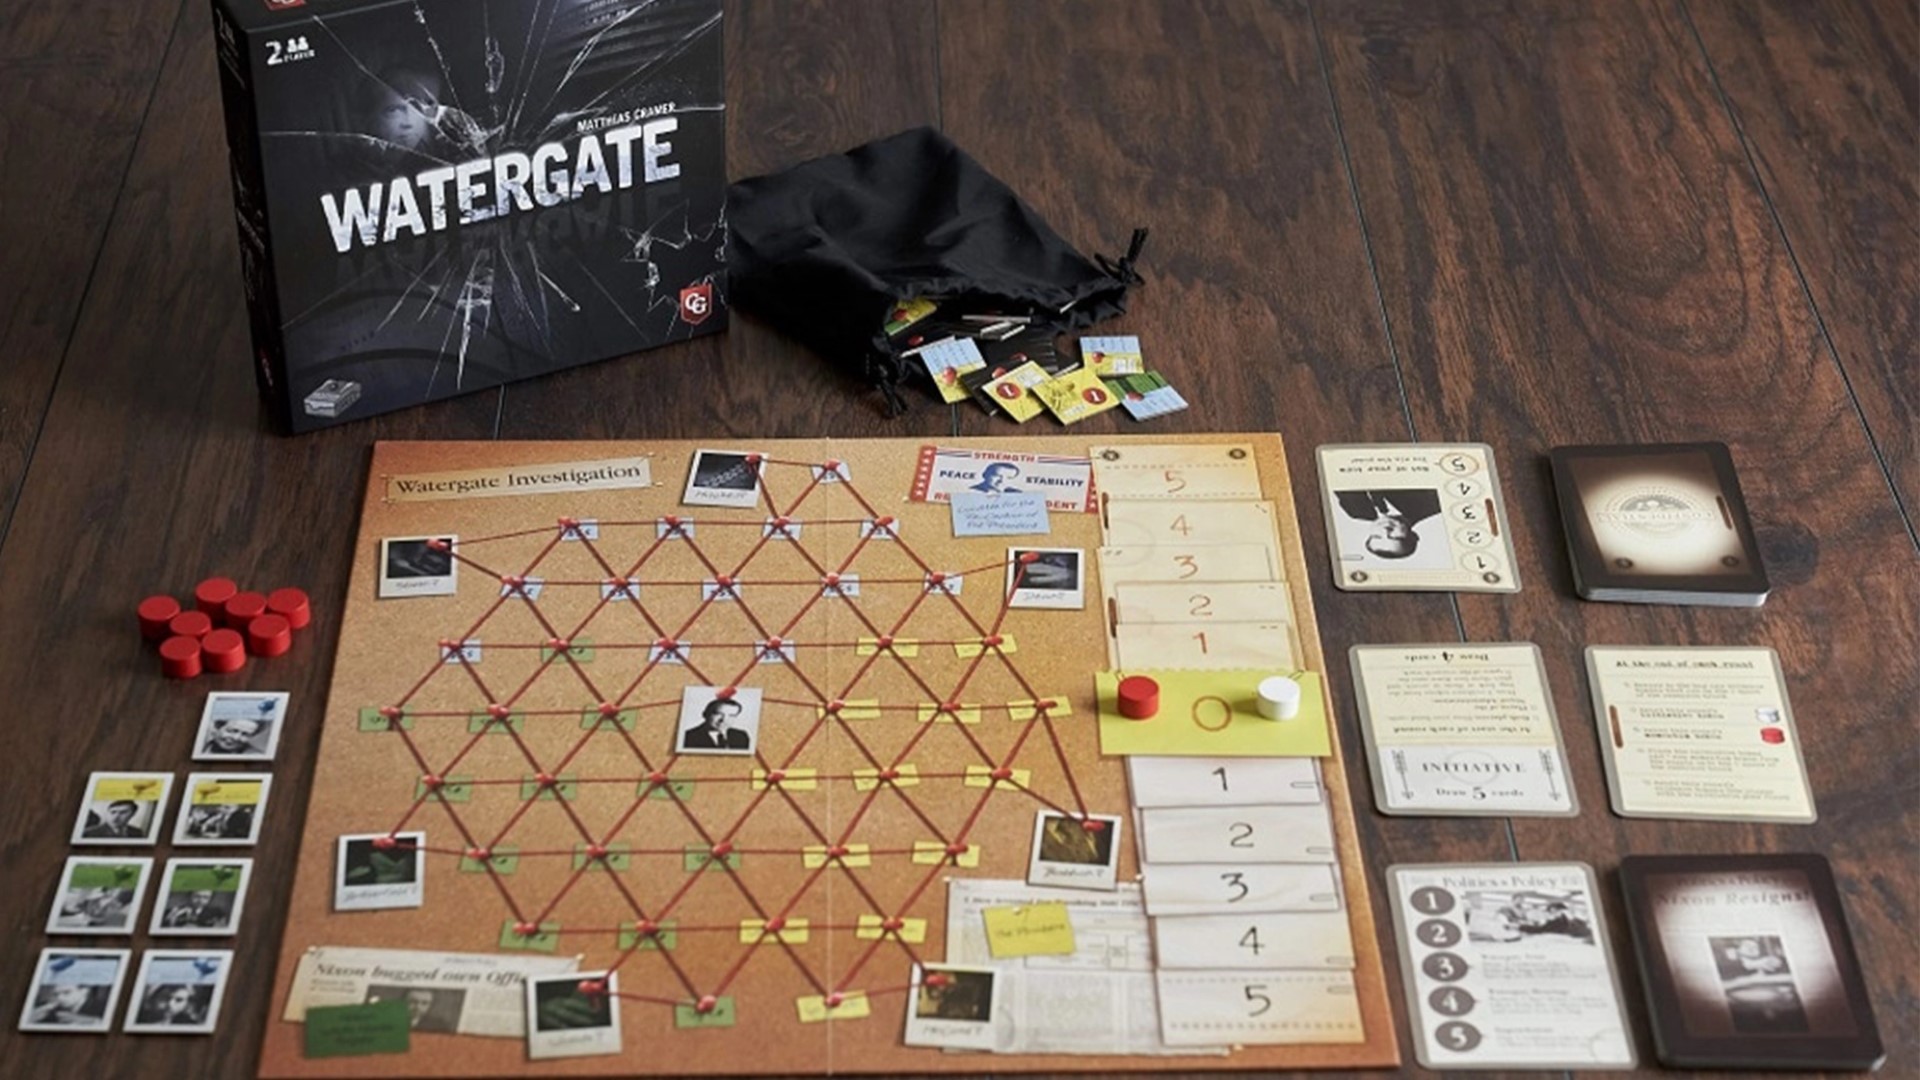 Table for two: Our favorite two-player board games